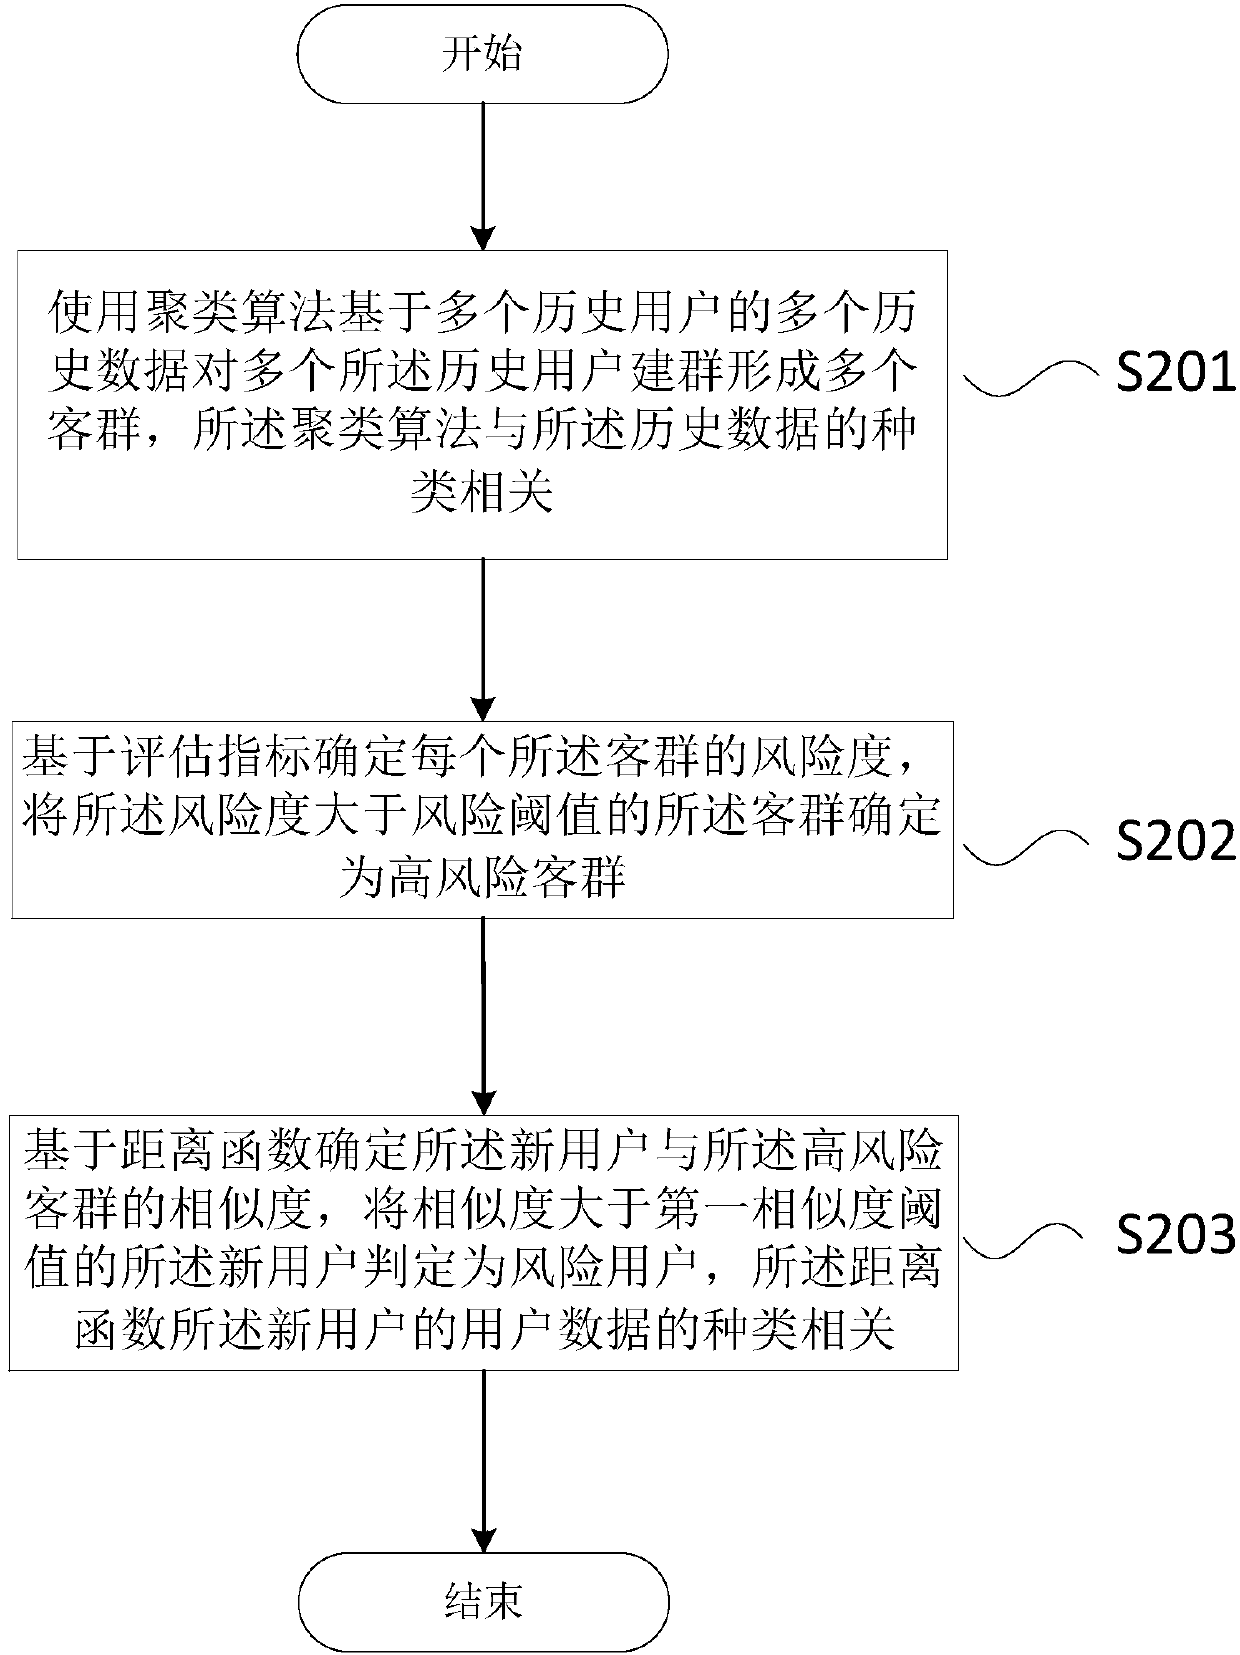 Dynamic high-risk customer-group detection method and system